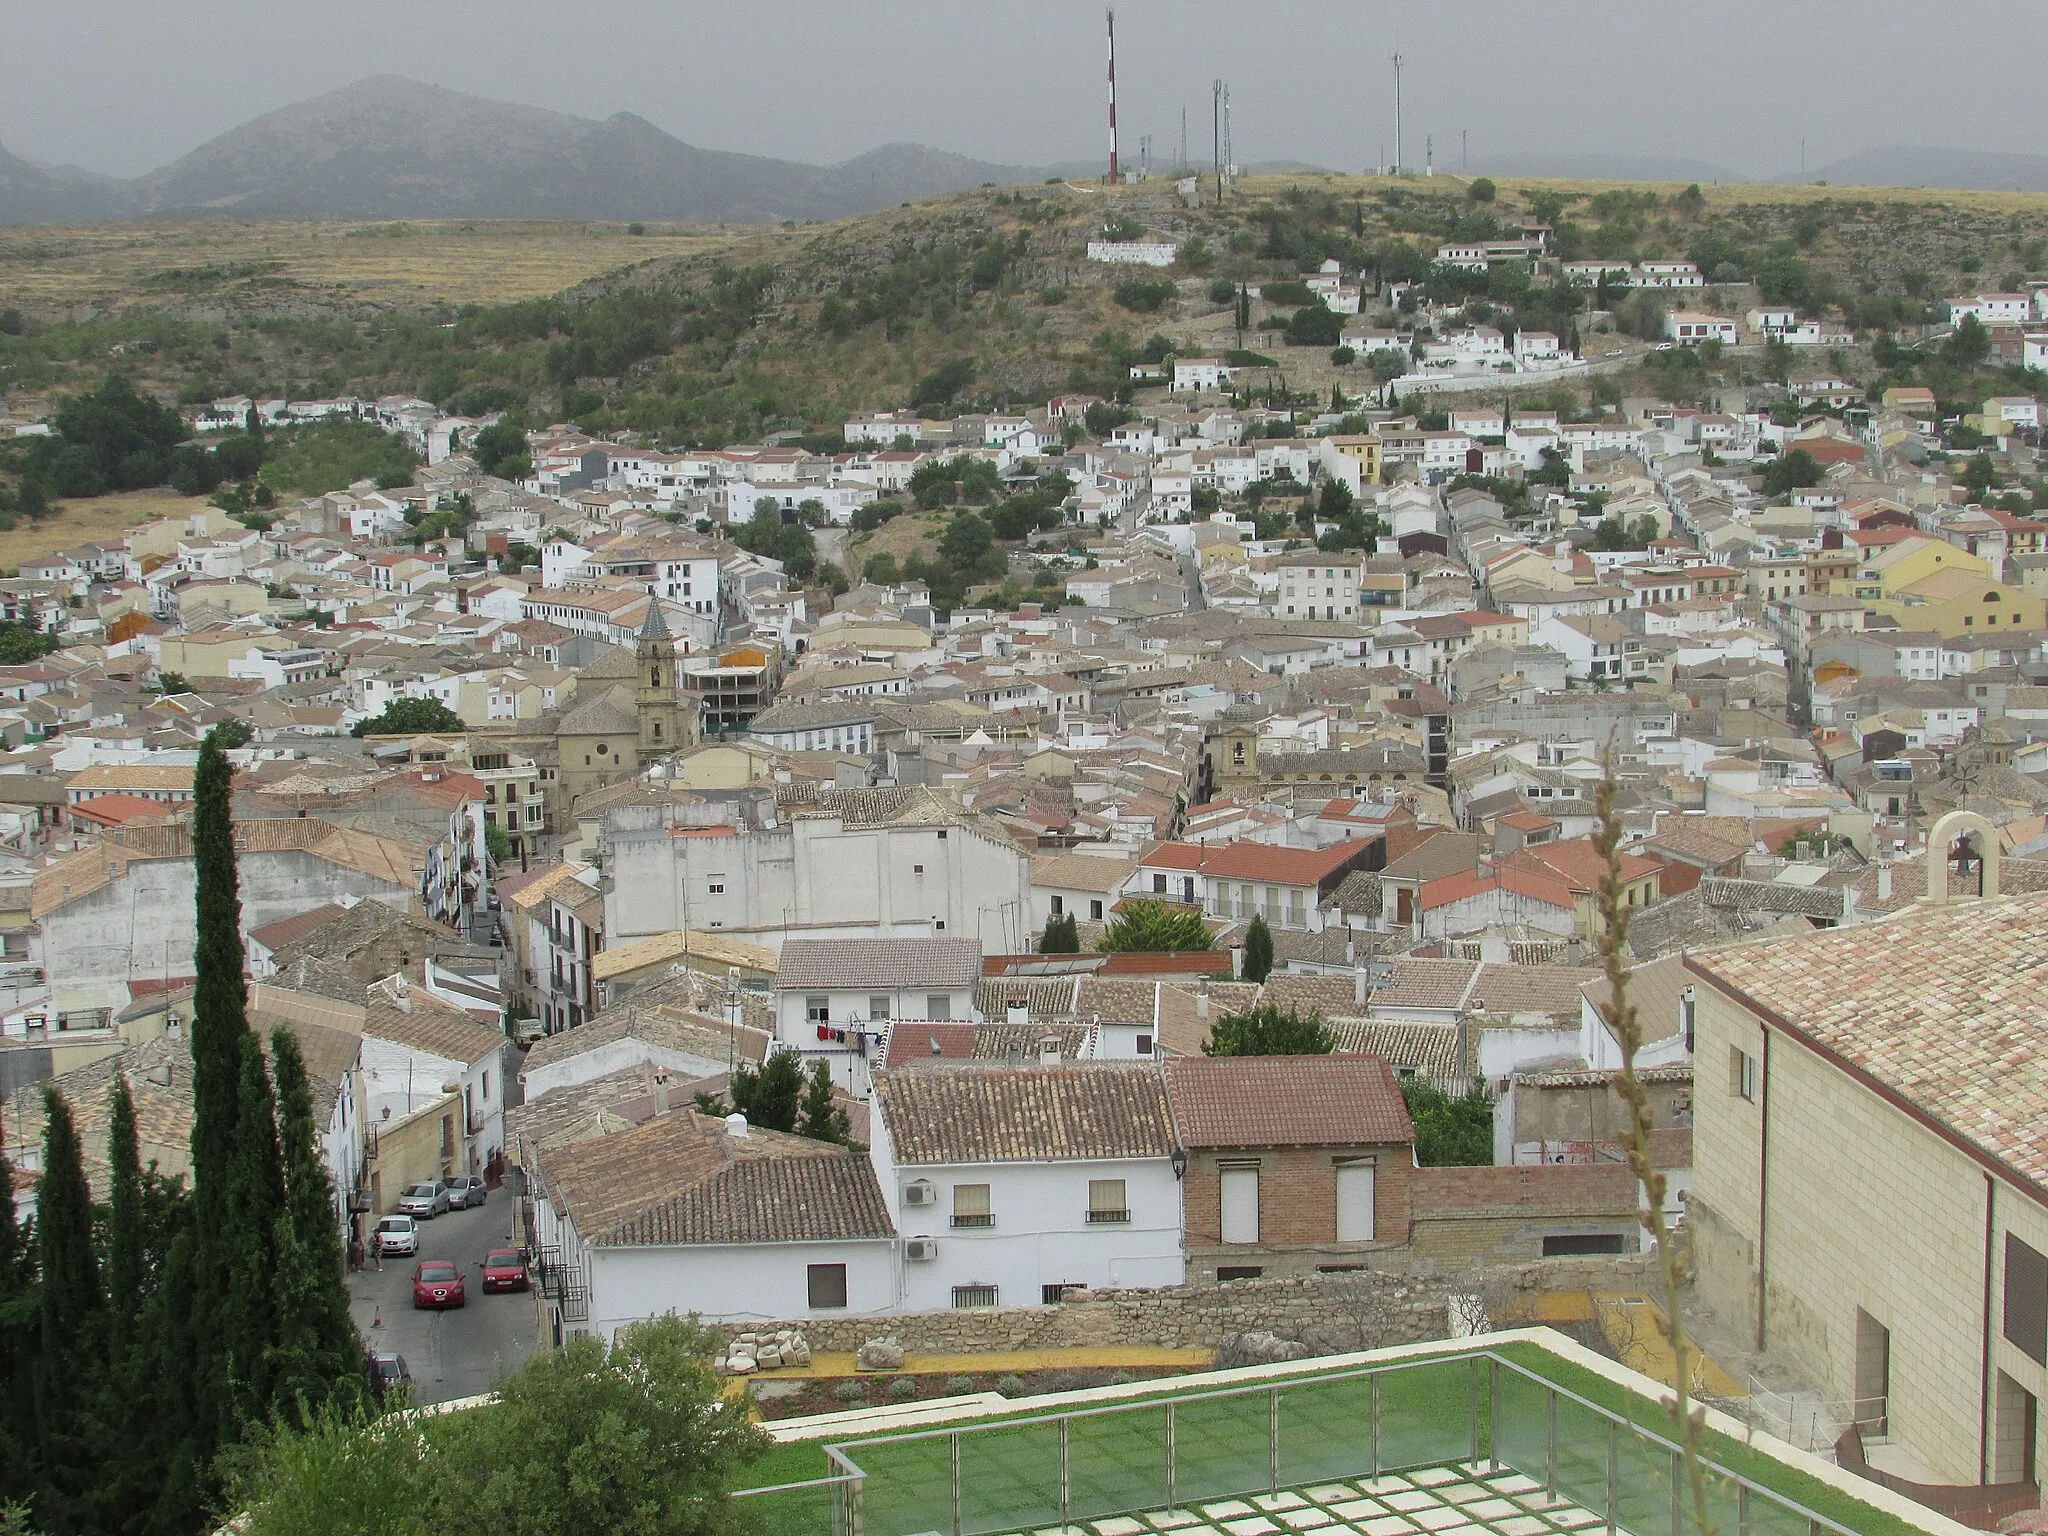 Photo showing: A view of the town of Alcalá la Real, Andallusia, Spain.